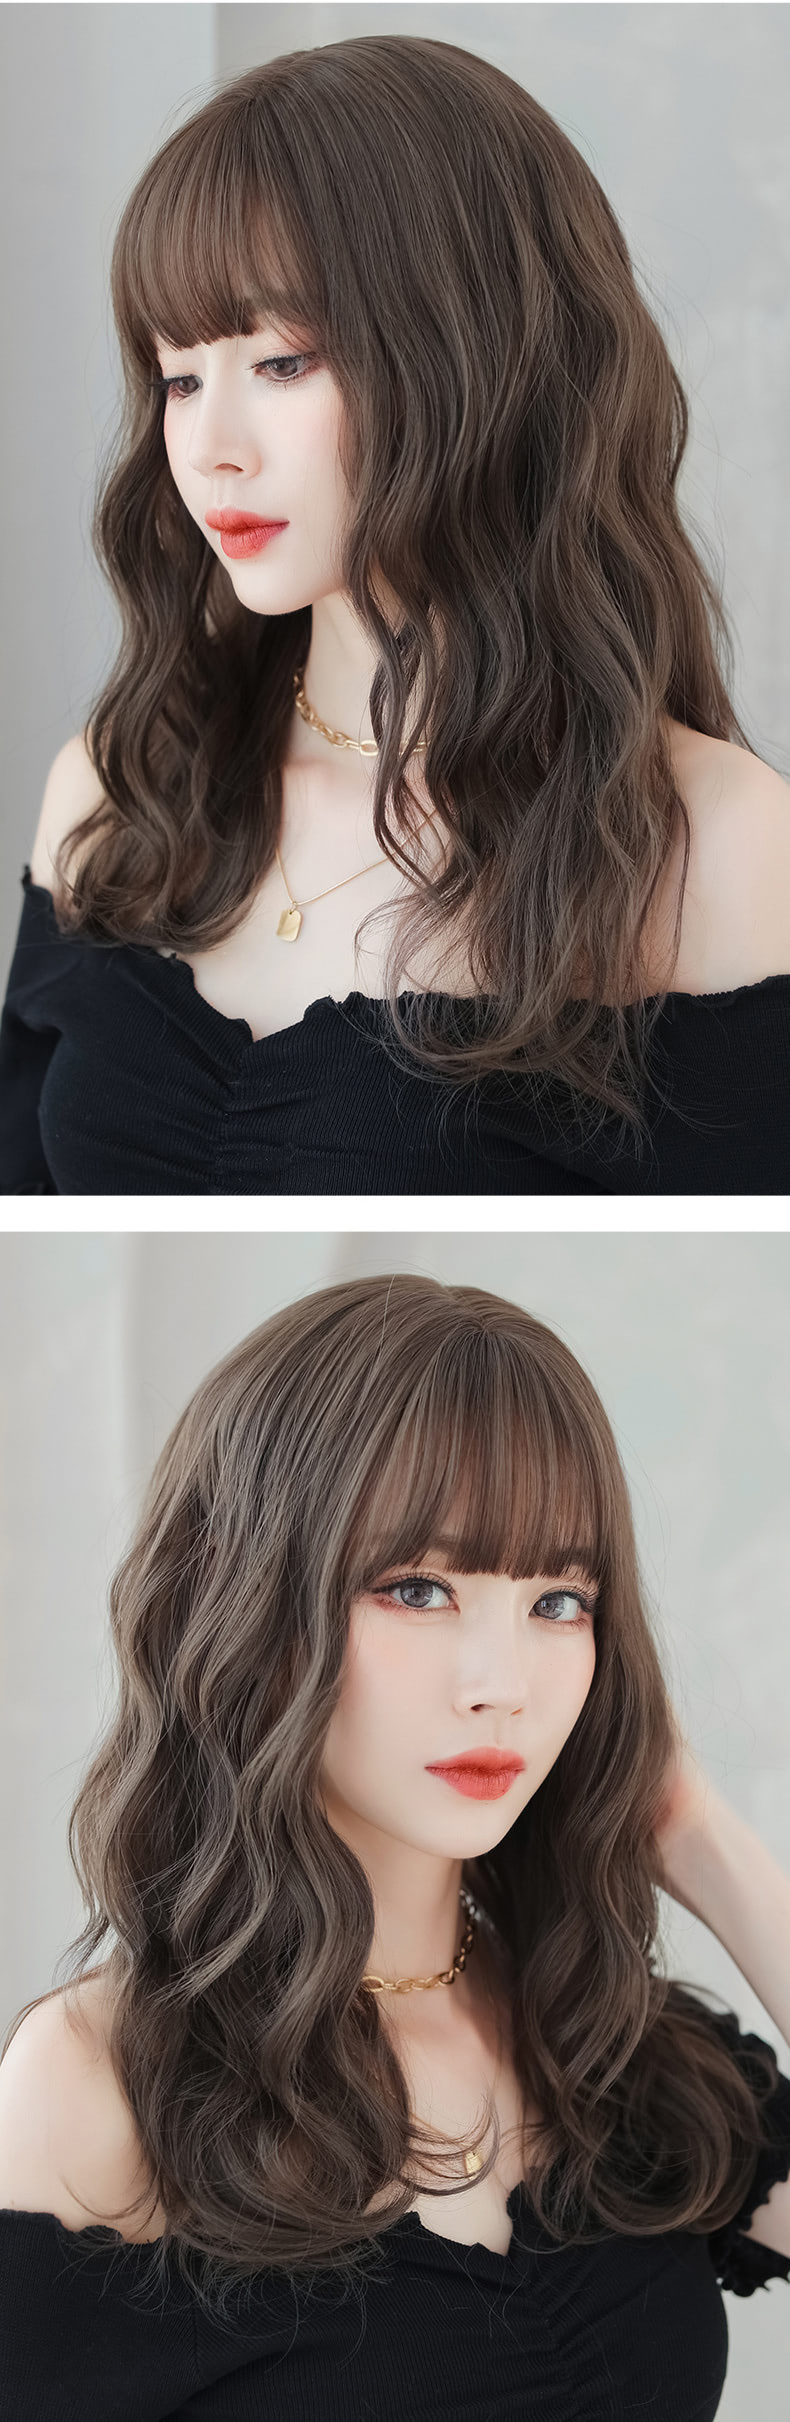 Fashion-Cool-Brown-Natural-Looking-Hair-Wig-with-Bangs-for-Ladies11.jpg